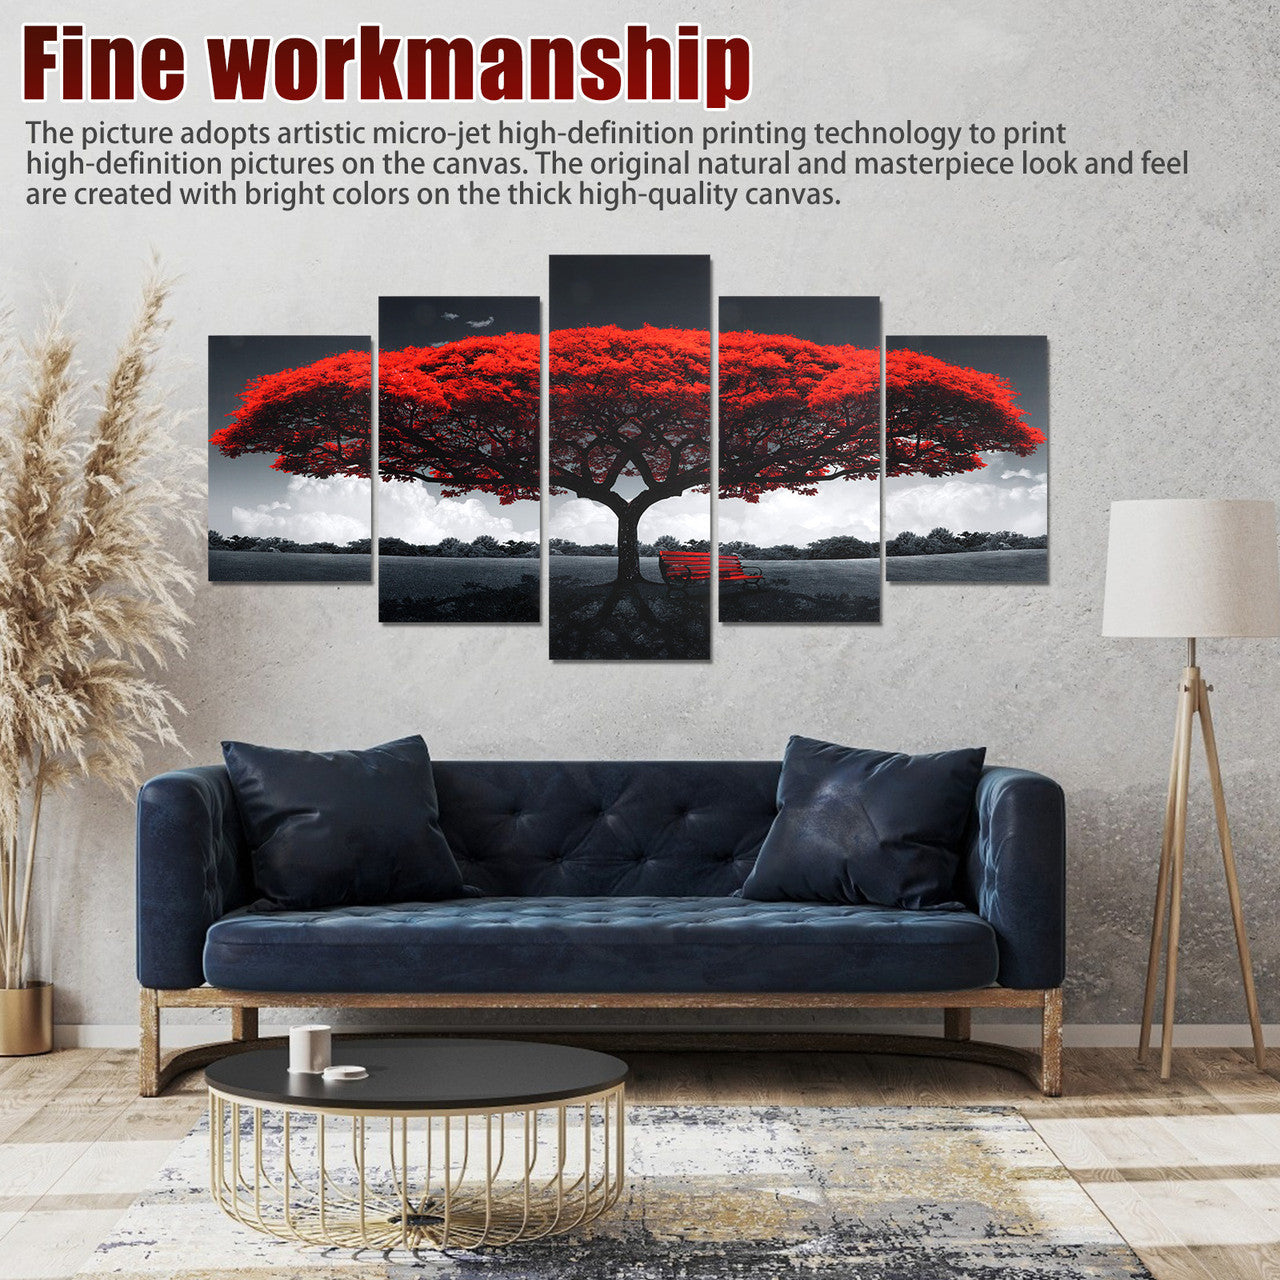 5 Consecutive Paintings Canvas Printing Micro-Jet High-Definition Printing Decorative Painting